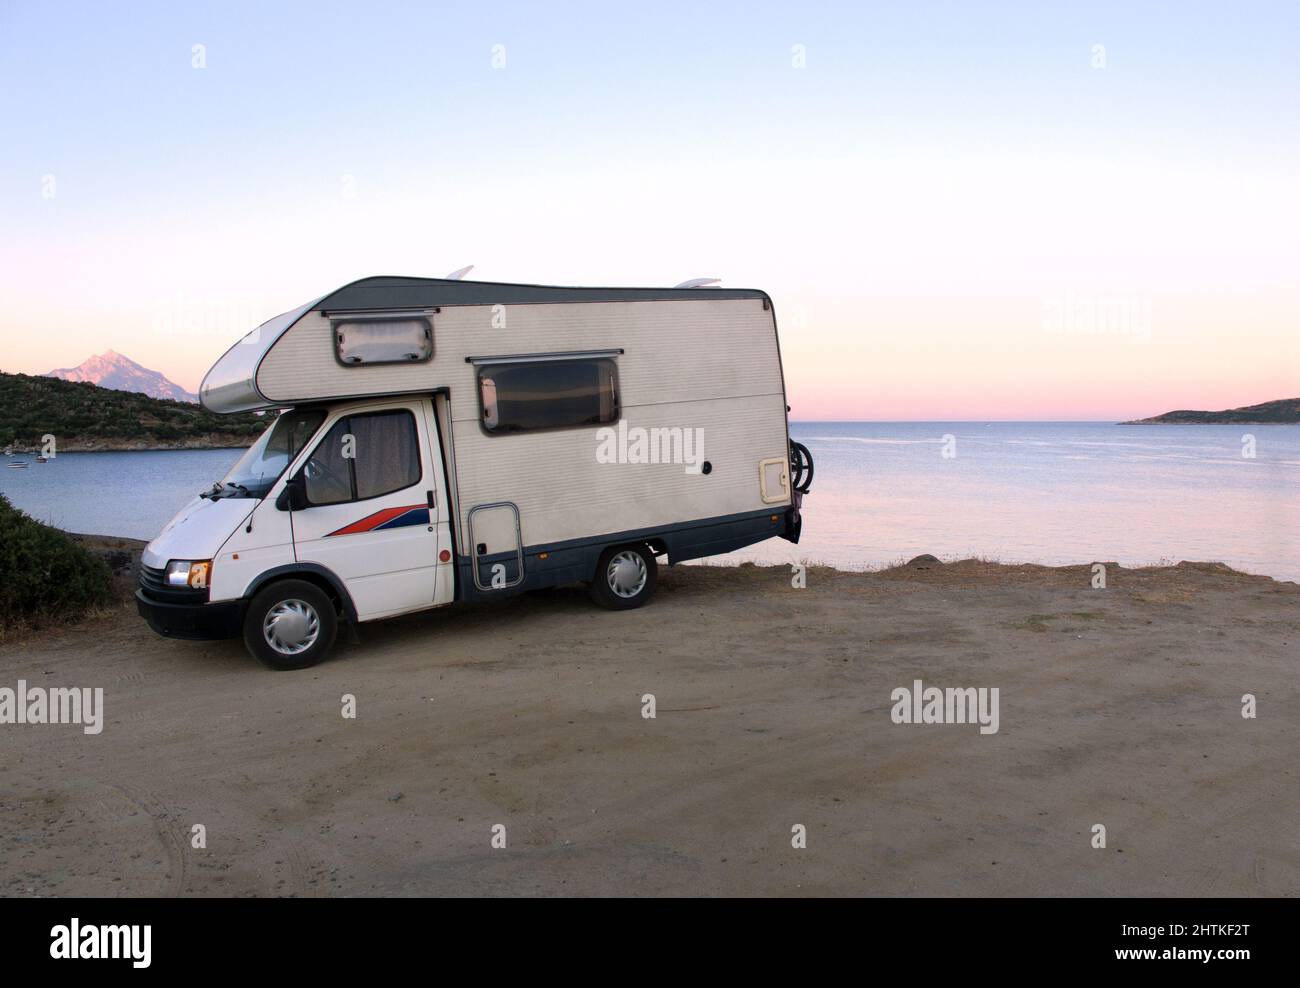 RV Camper On the Beach At Sunset Stock Photo